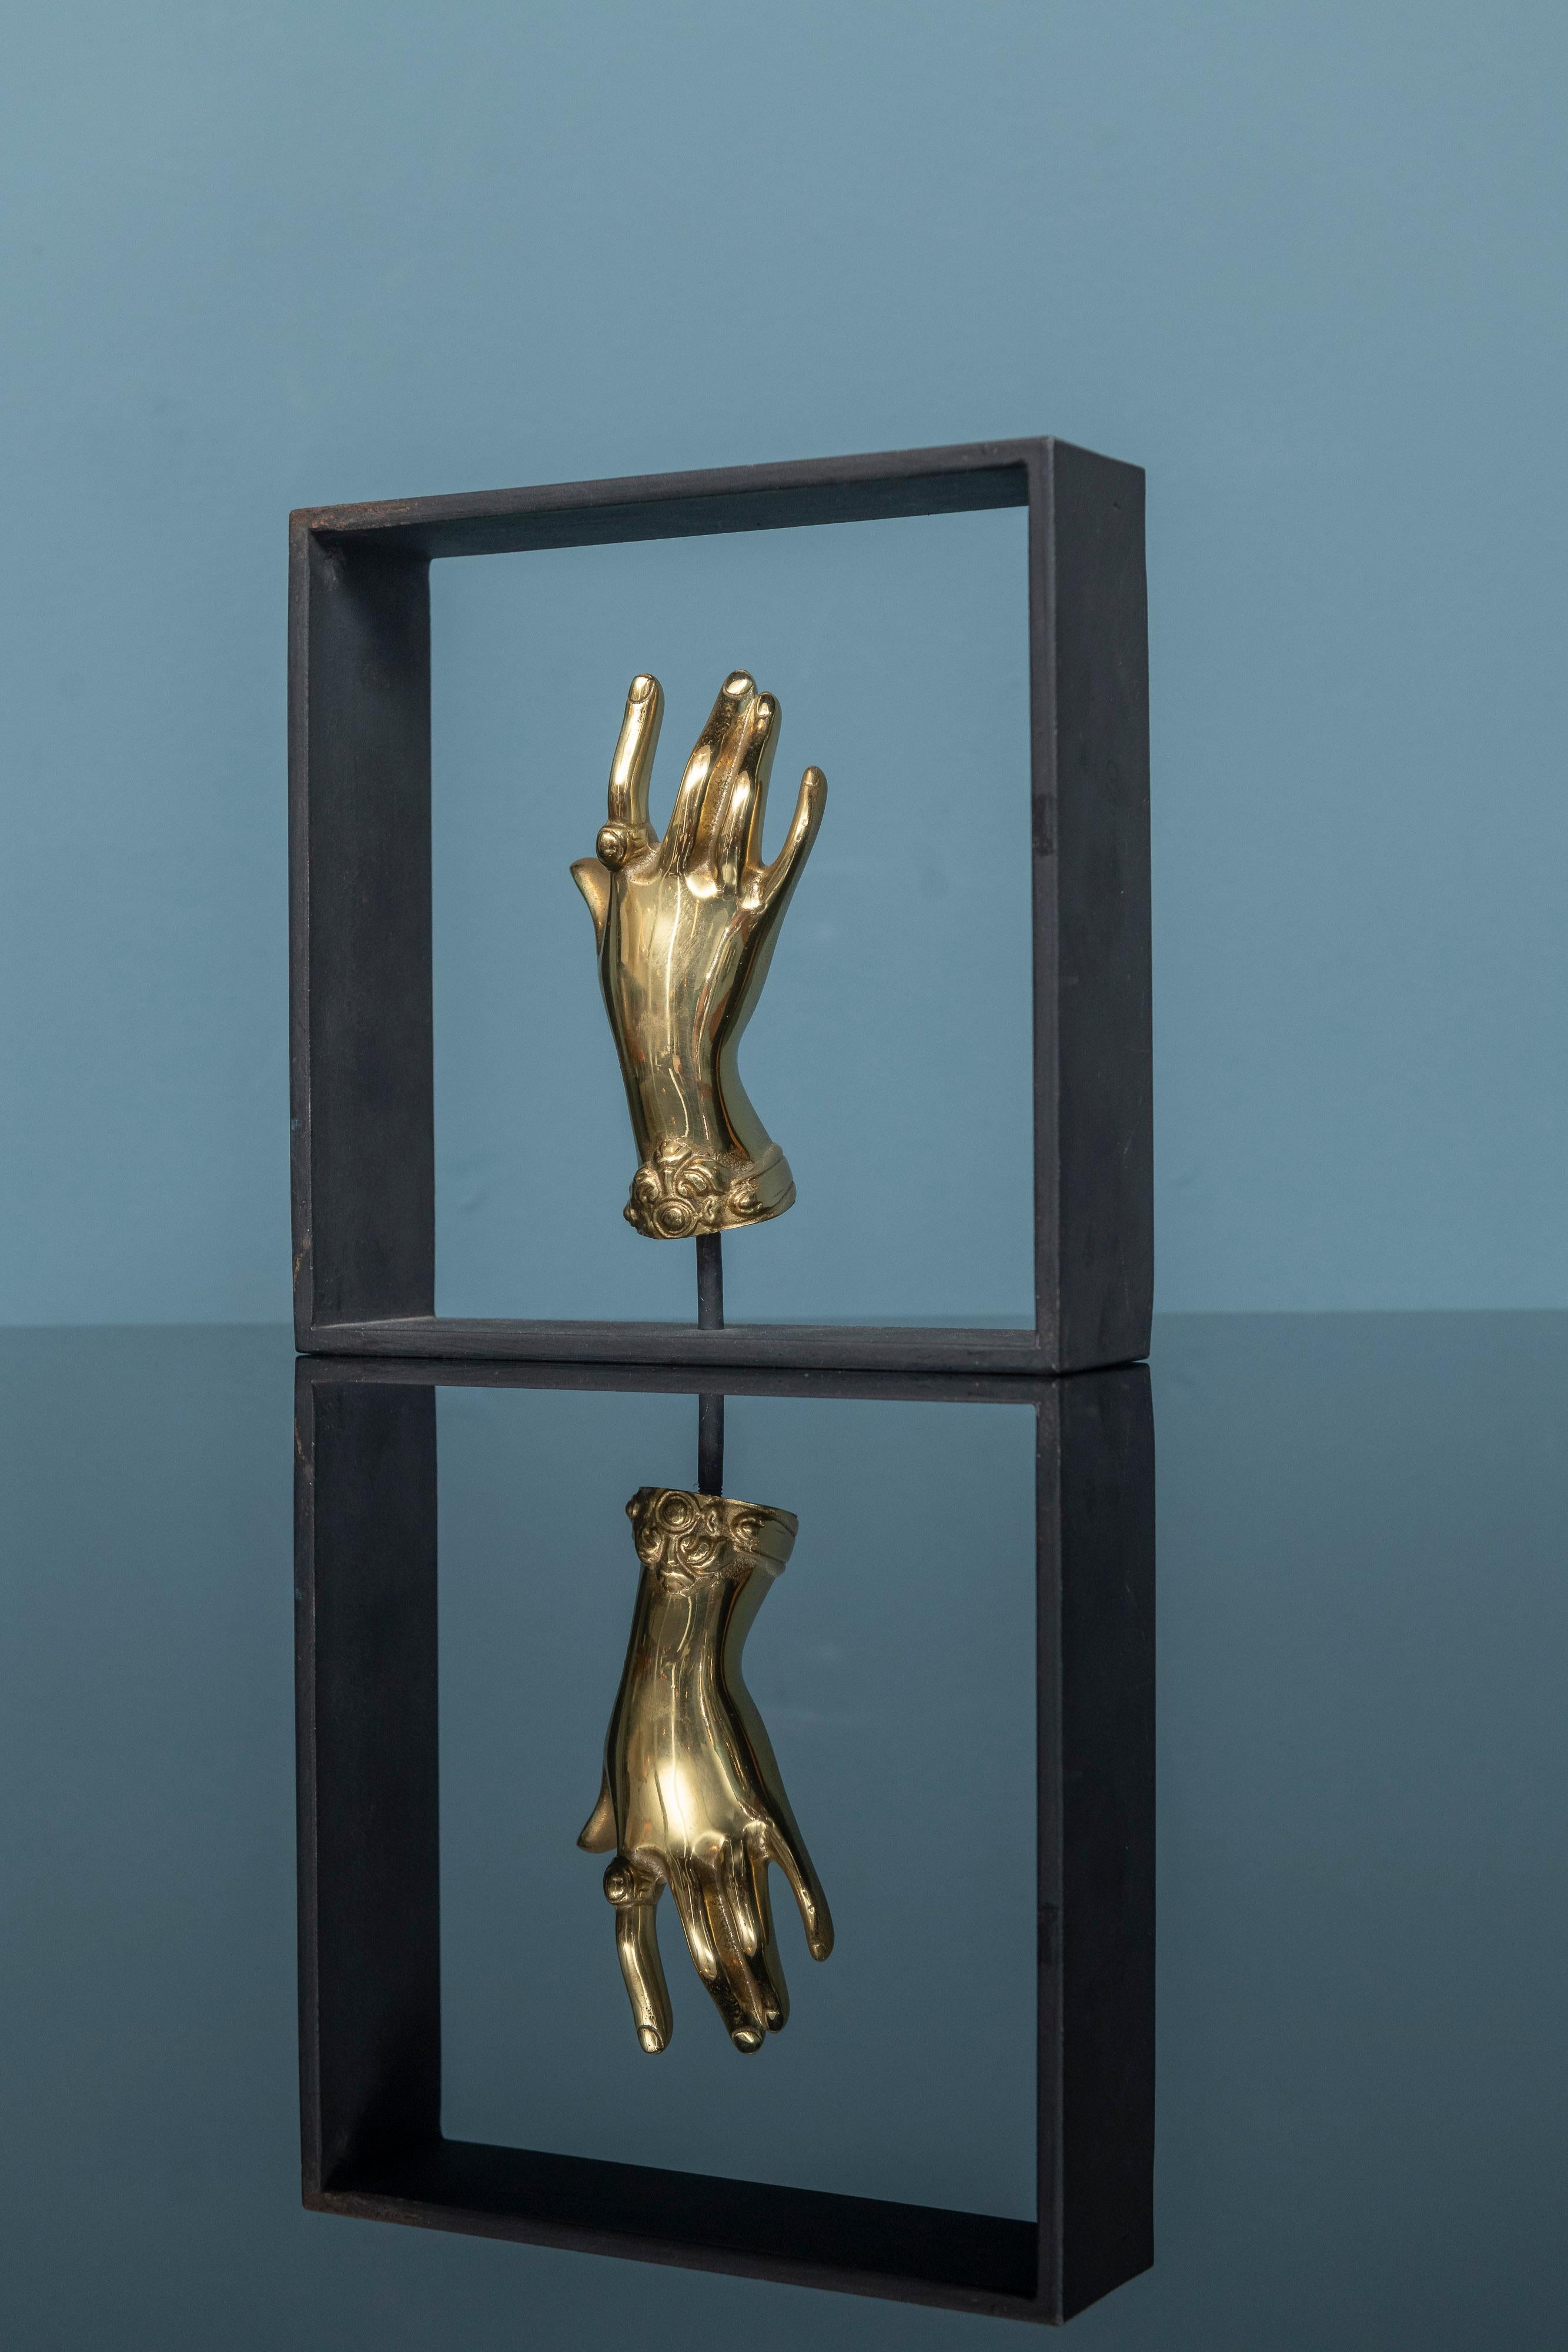 Carl Aubock design solid brass ballerina hand model #5275, Austria. 
Lovely decorative desk or table top object by the master Carl Aubock. Mounted on a flat steel rectangular frame, signed and labeled Aubock, Austria for Neiman Marcus.